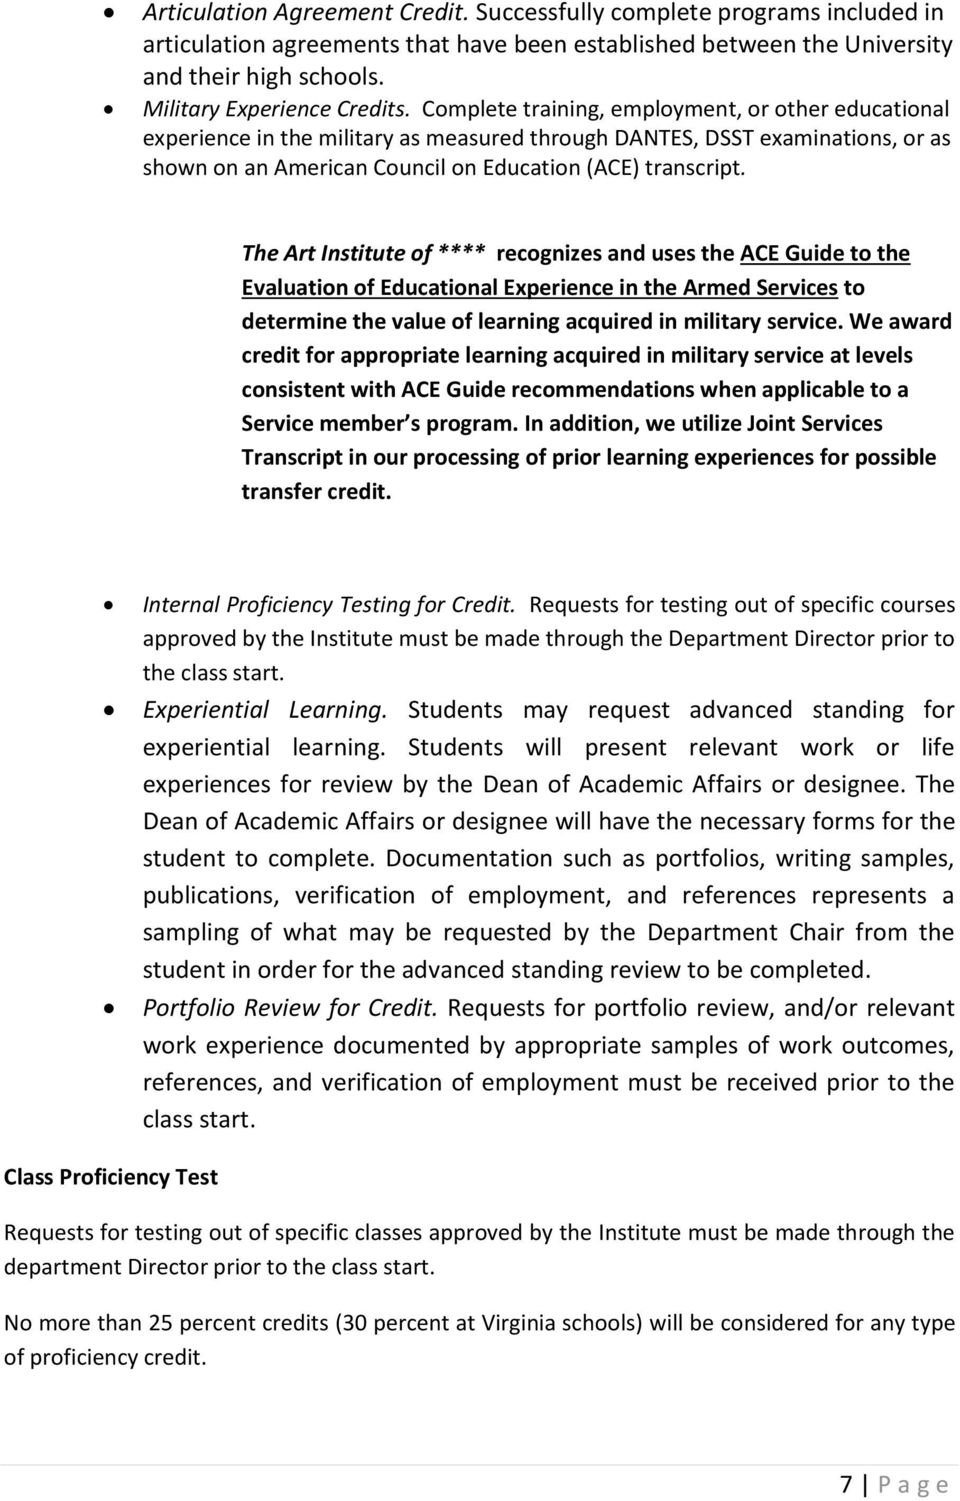 The Art Institute of **** recognizes and uses the ACE Guide to the Evaluation of Educational Experience in the Armed Services to determine the value of learning acquired in military service.